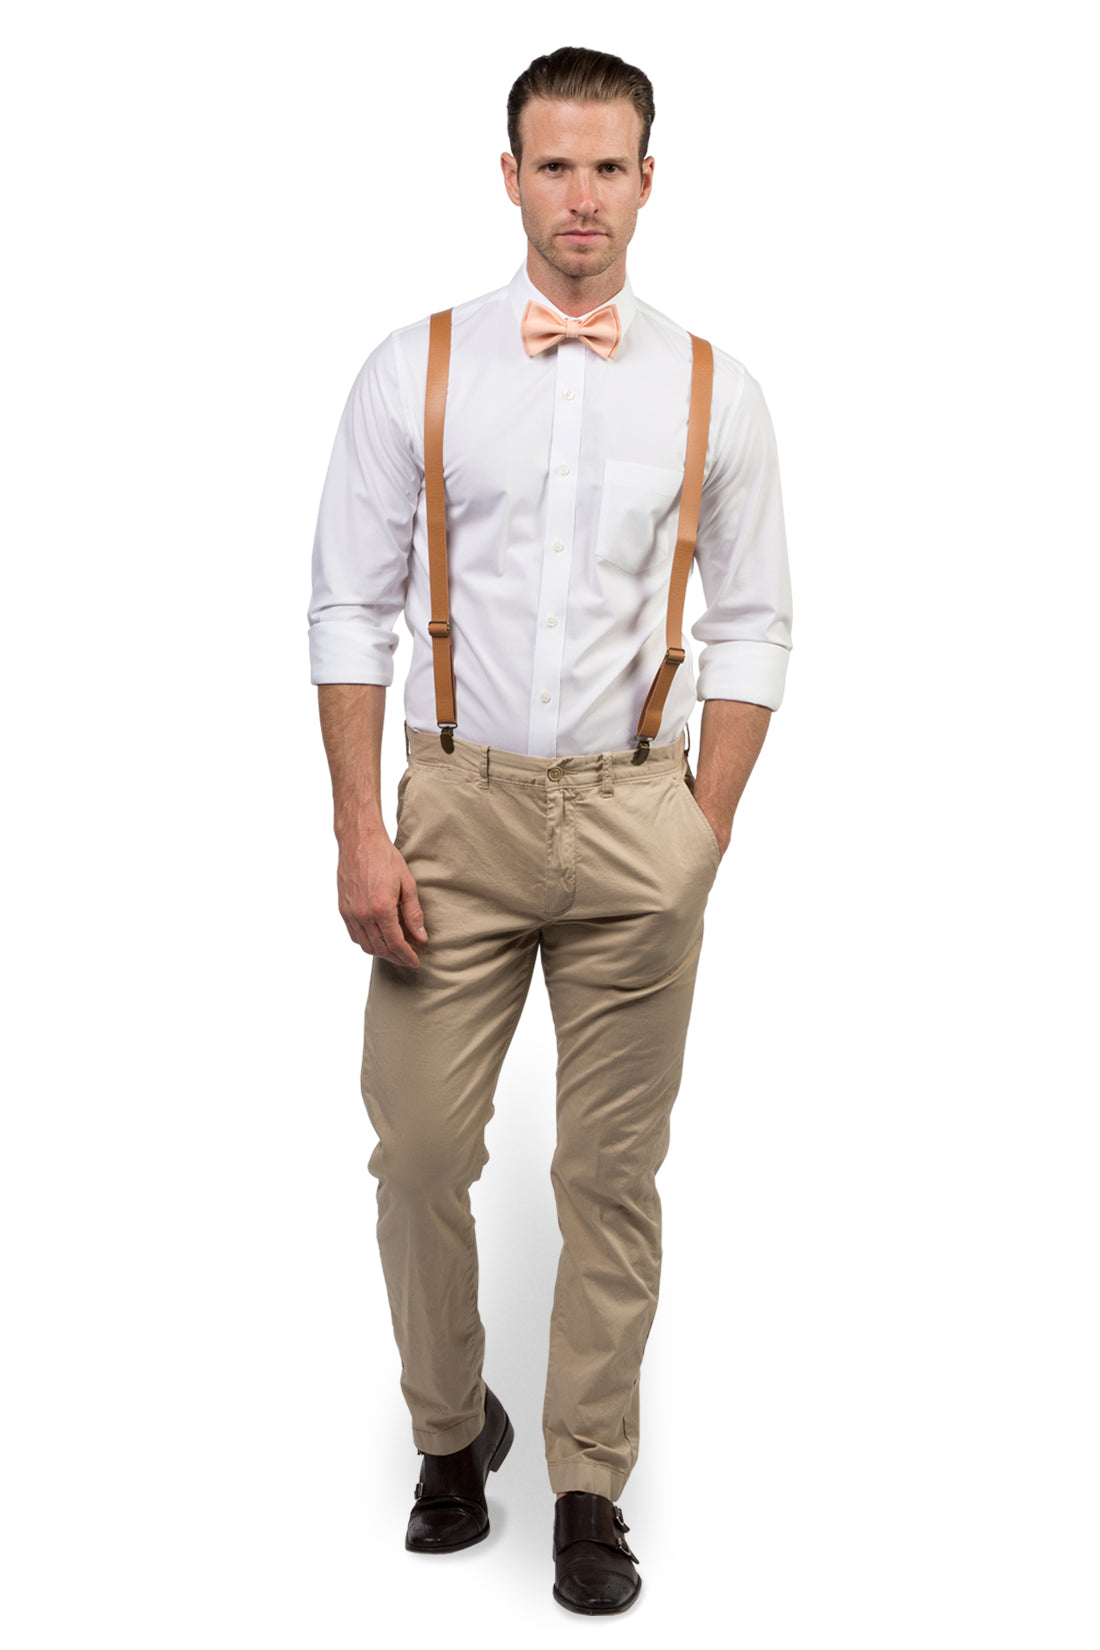 Tan Leather Suspenders & Peach Bow Tie